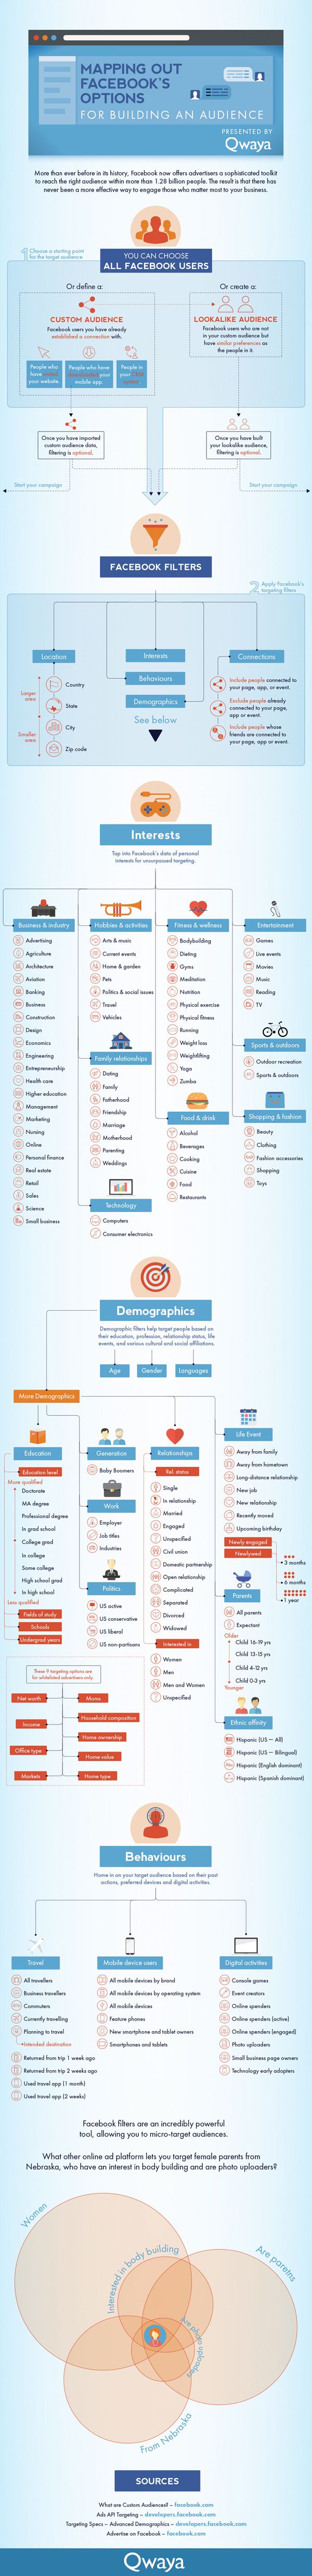 Advertising-Infographics-A-Quick-Rundown-of-Facebook-Targeting-Options-Infographic-via-BornToBeSocial Advertising Infographics : A Quick Rundown of Facebook Targeting Options #Infographic | via #BornToBeSocial...